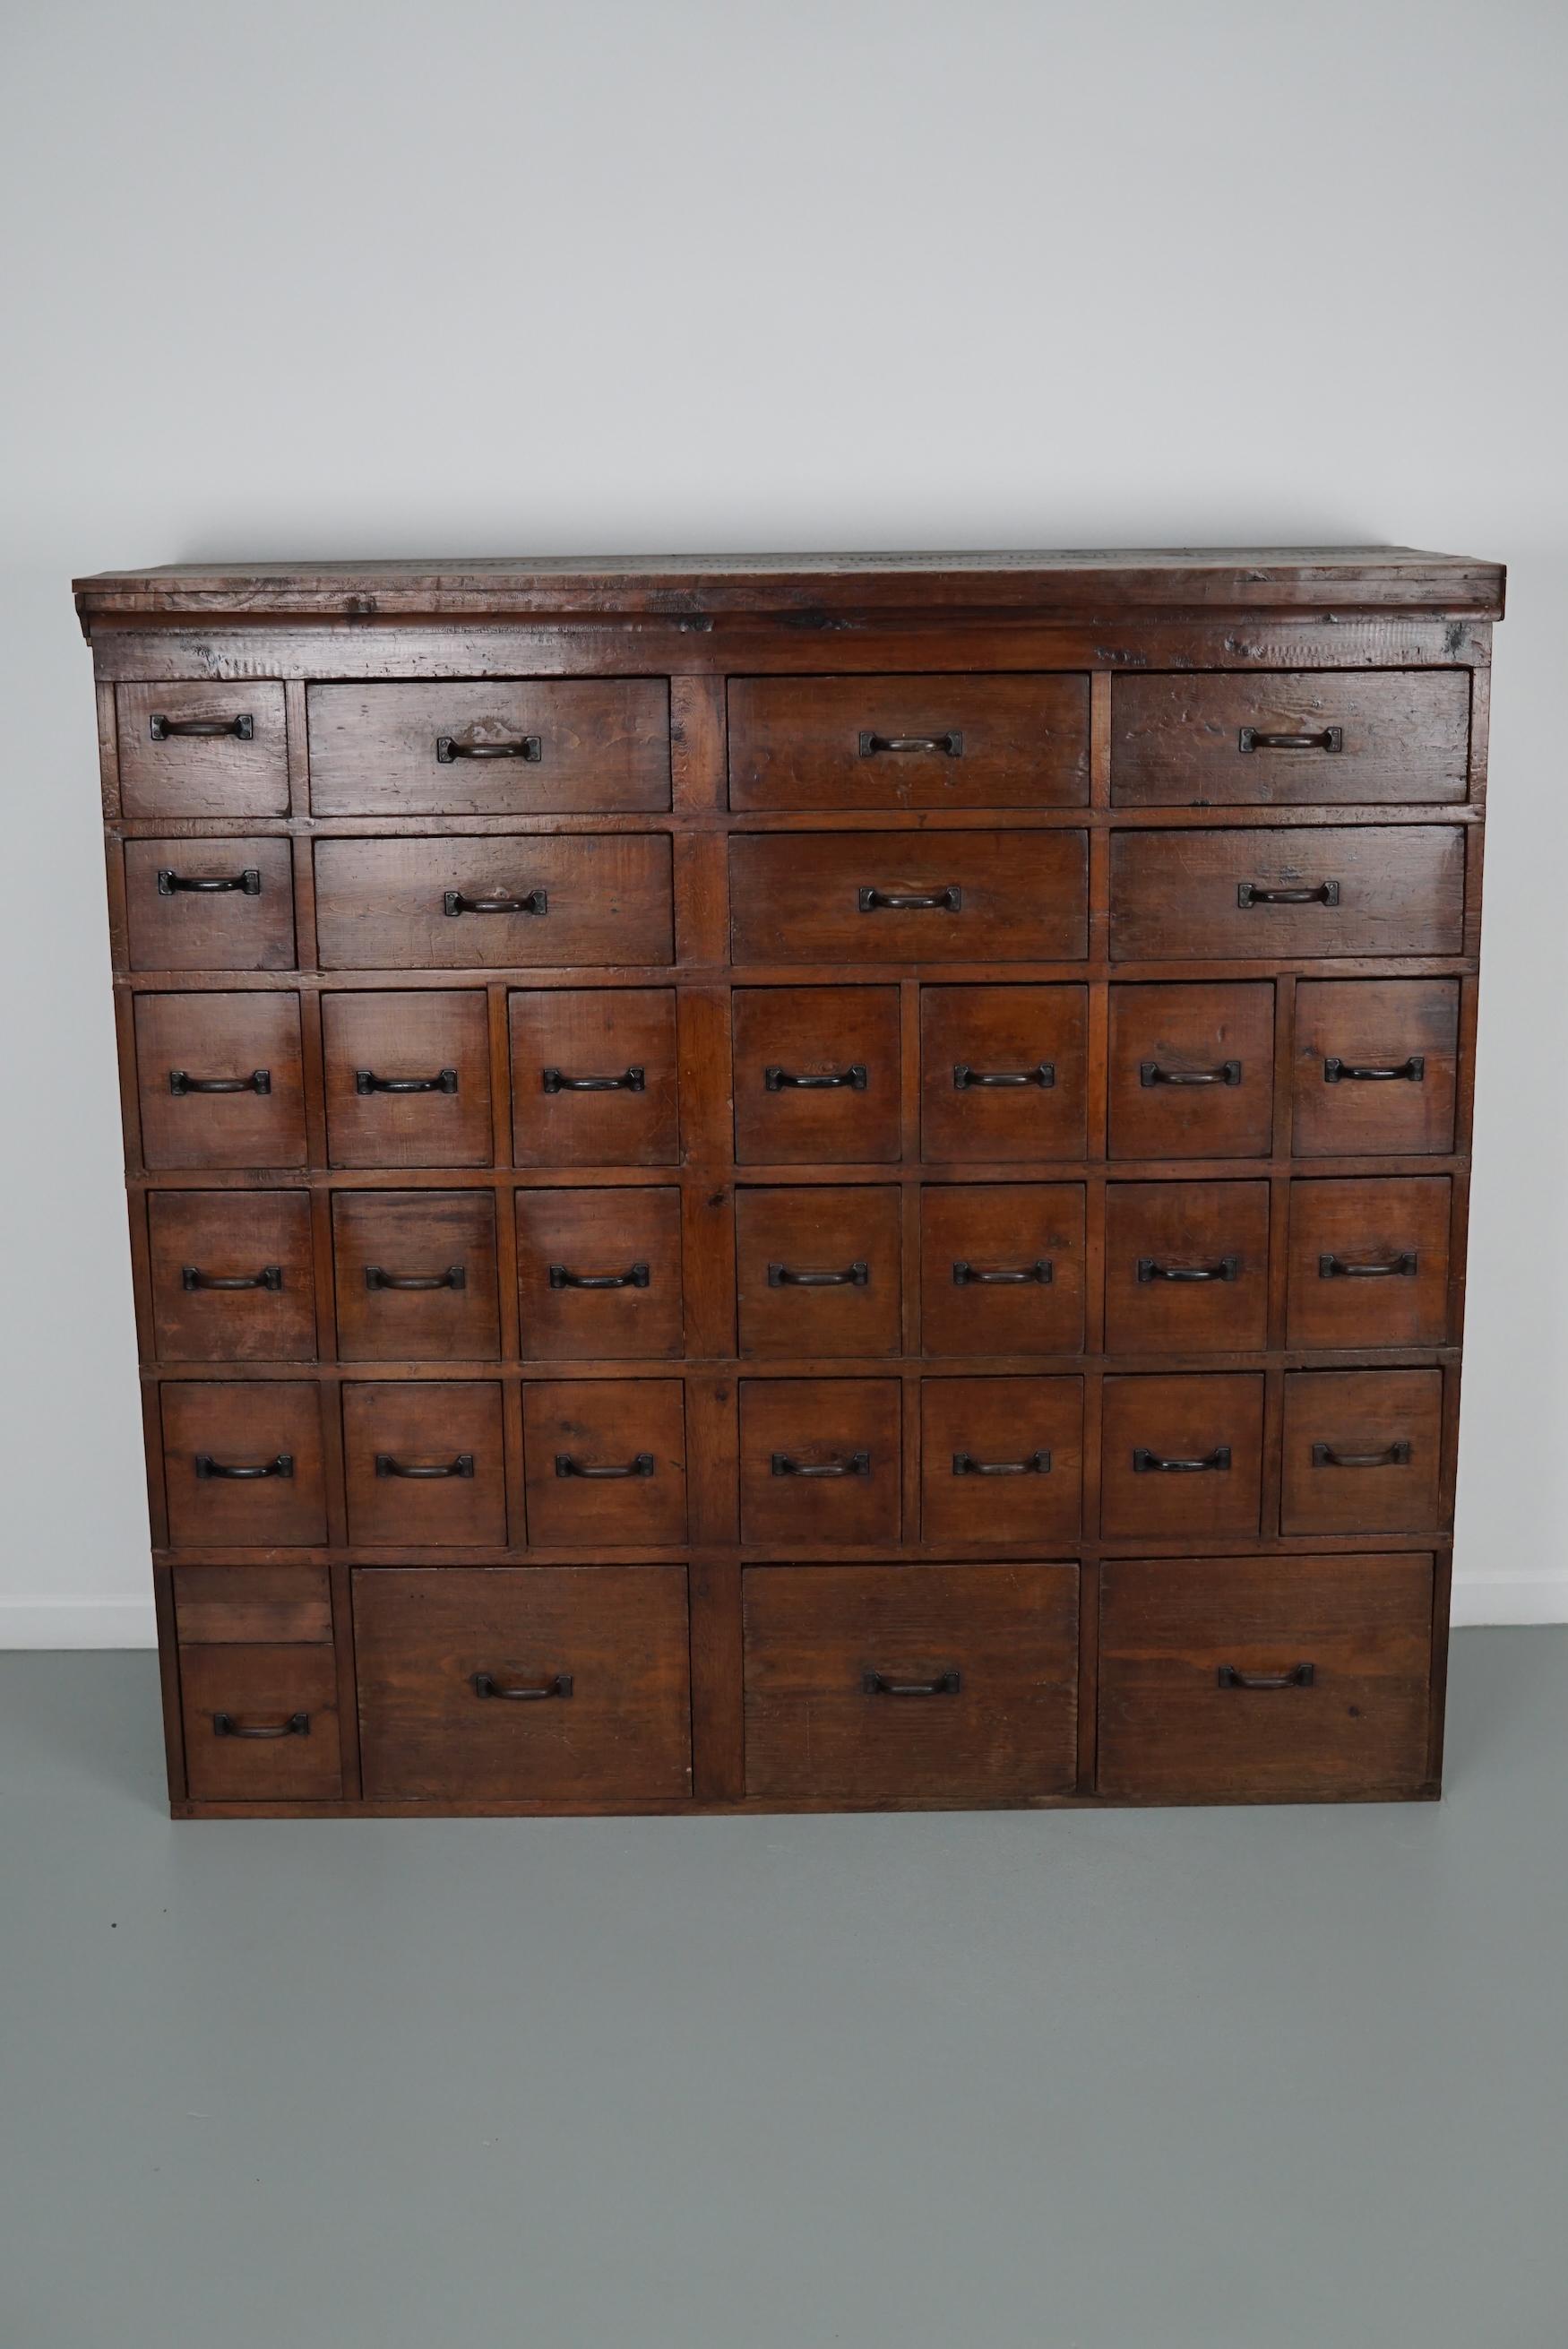 This workshop cabinet was made from pine in the Netherlands circa 1950. It features many drawers in different sizes with black metal handles. The interior dimensions of the drawers are: DWH 45 x 35 / 13.5 / 34 x 13 / 18 / 27 cm. The cabinet has